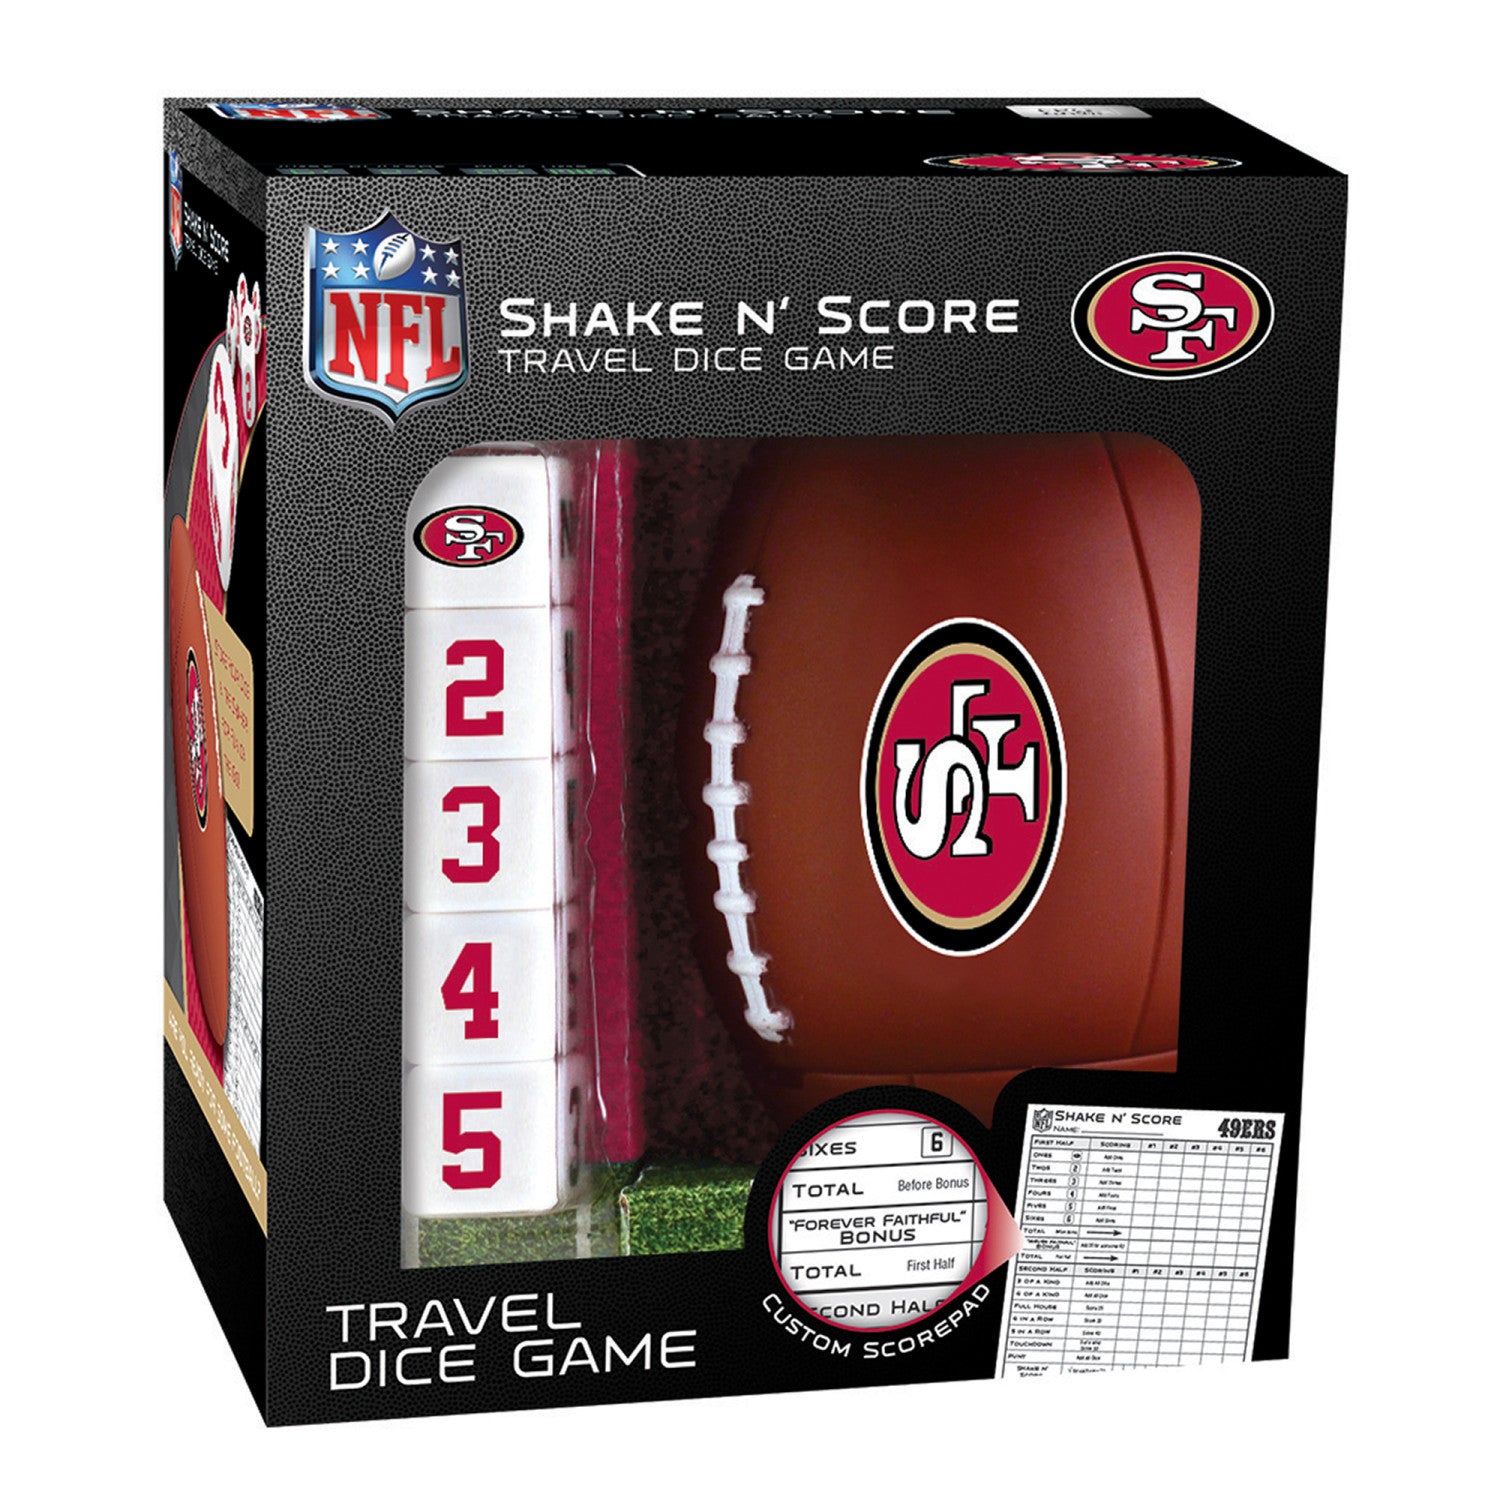 NFL San Francisco 49ers Sippy Cup